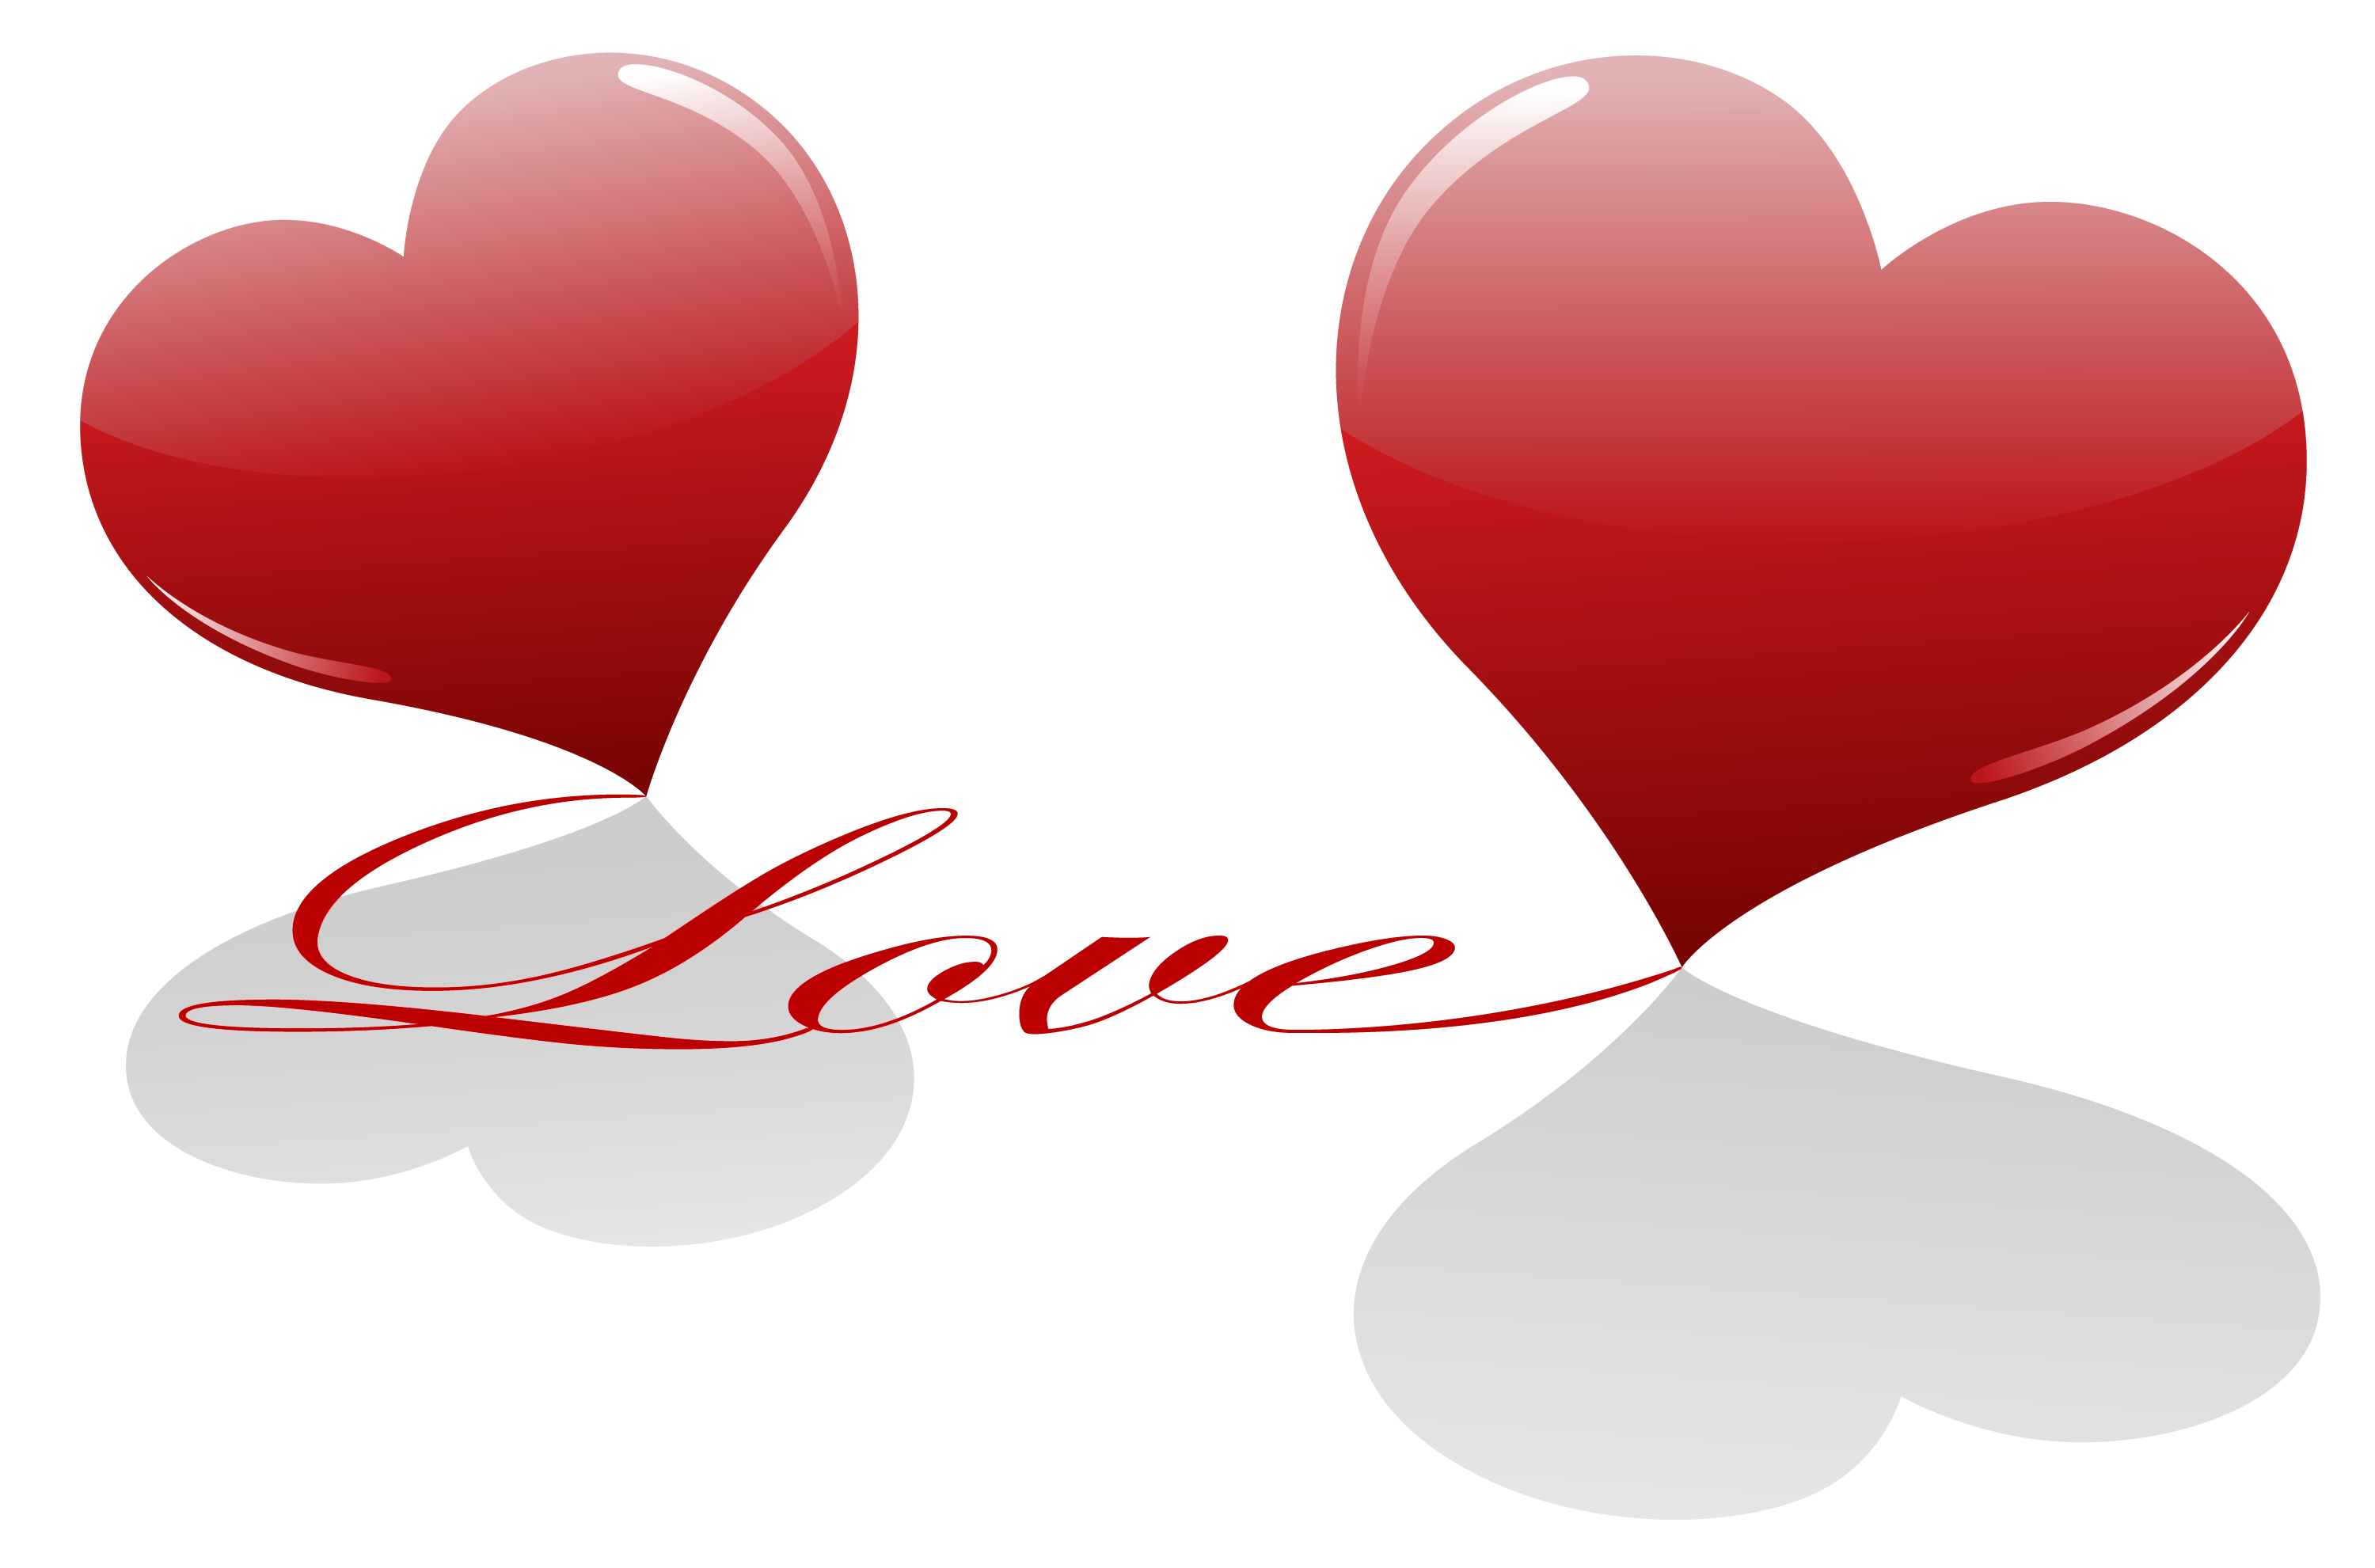 Heart With Love Clipart Vector, Heart Love Red Design, Valentine, Heart,  Hearts PNG Image For Free Download